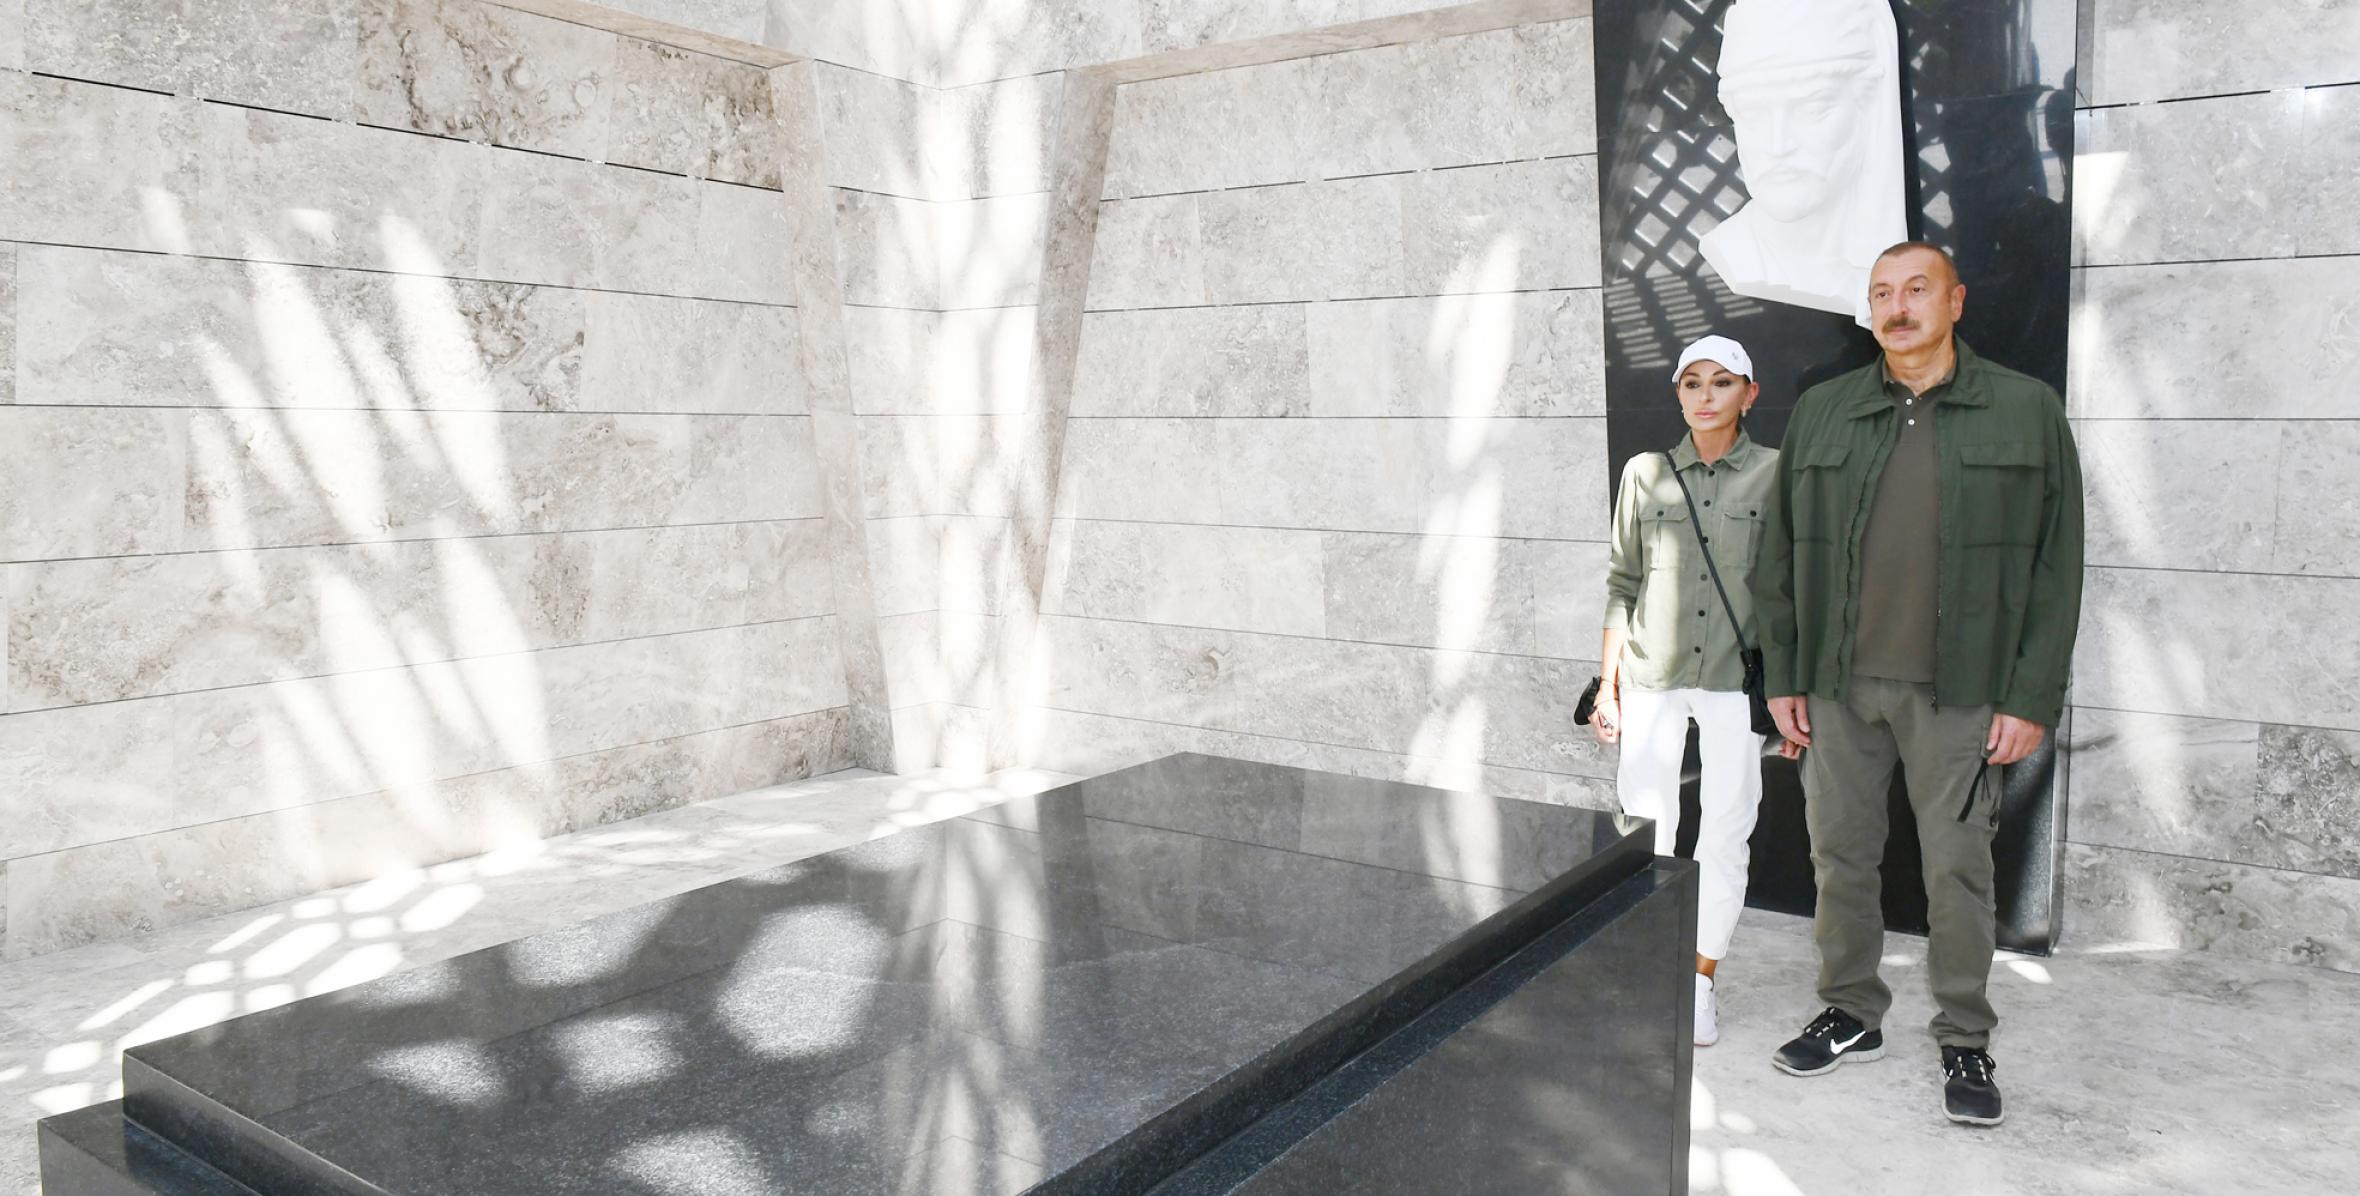 Ilham Aliyev and First Lady Mehriban Aliyeva attended the opening ceremony of the Museum Mausoleum Complex of the great Azerbaijani poet and public figure Mollah Penah Vagif